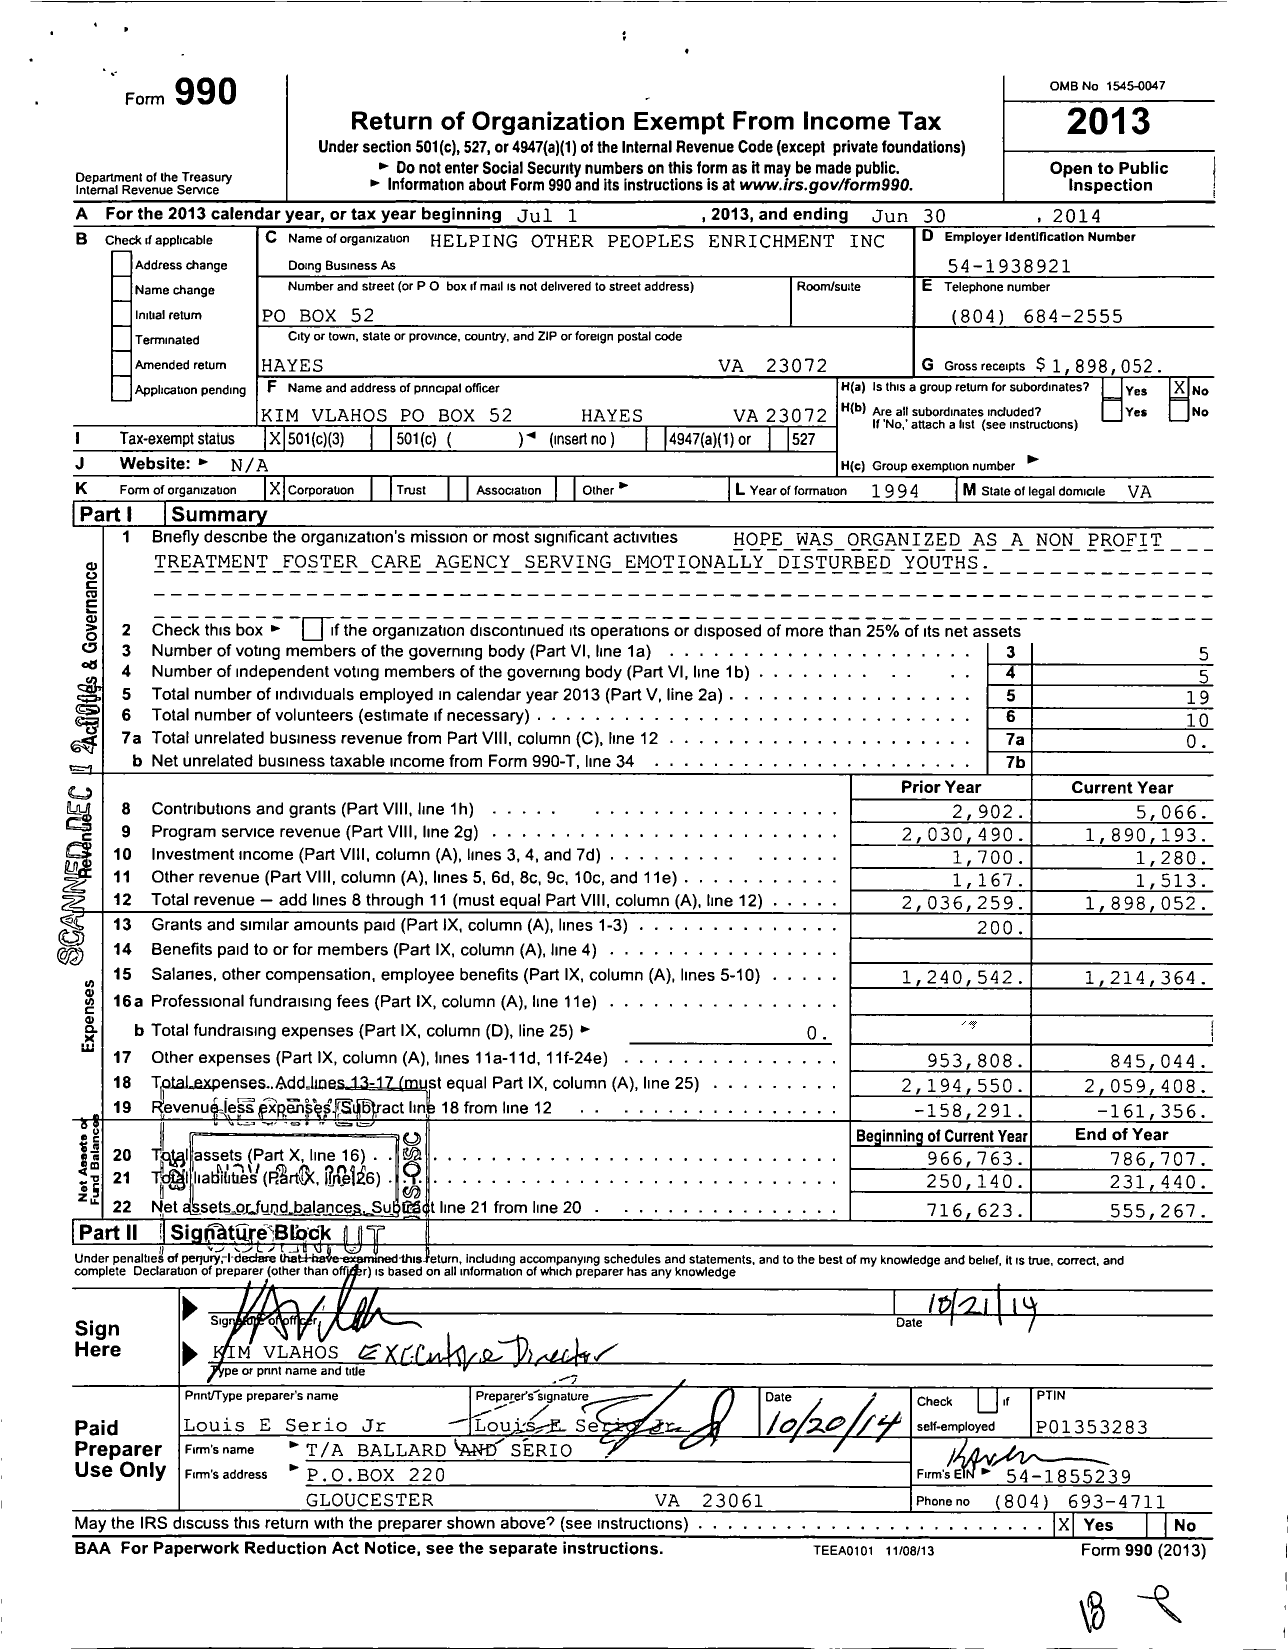 Image of first page of 2013 Form 990 for Helping Other Peoples Enrichment